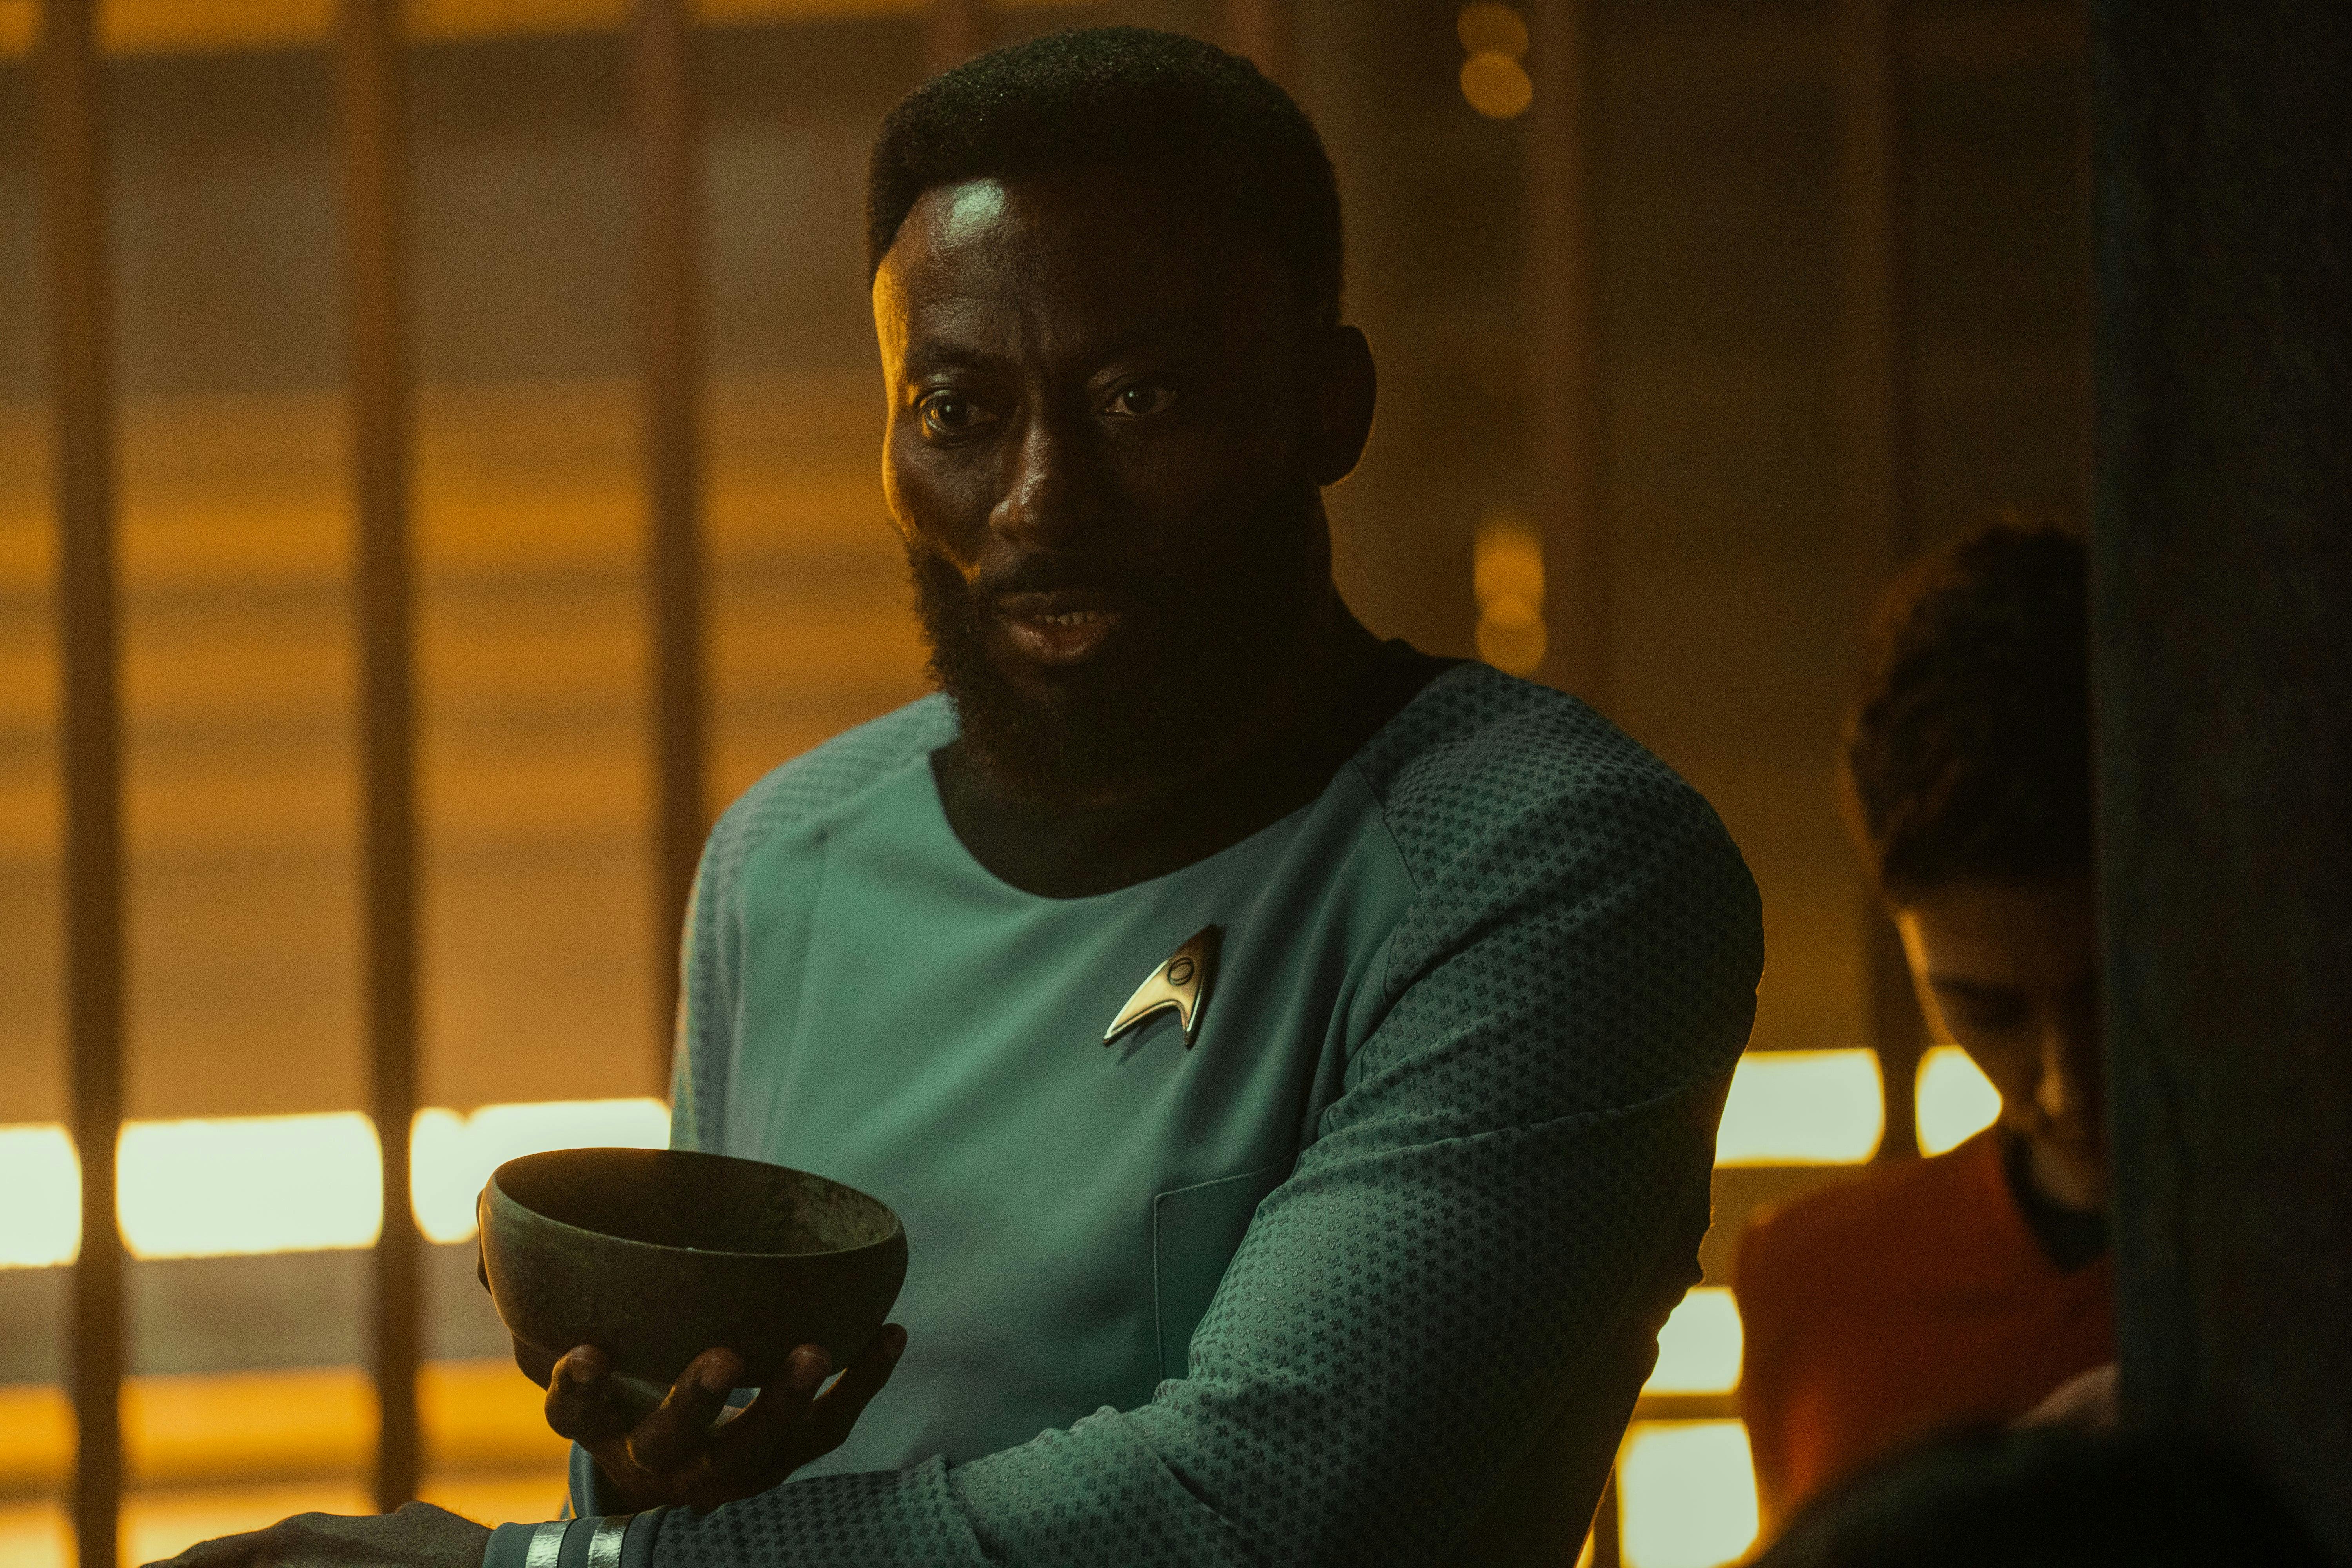 Dr. M'Benga (Babs Olusanmokun) holds a tricorder and looks concerned.